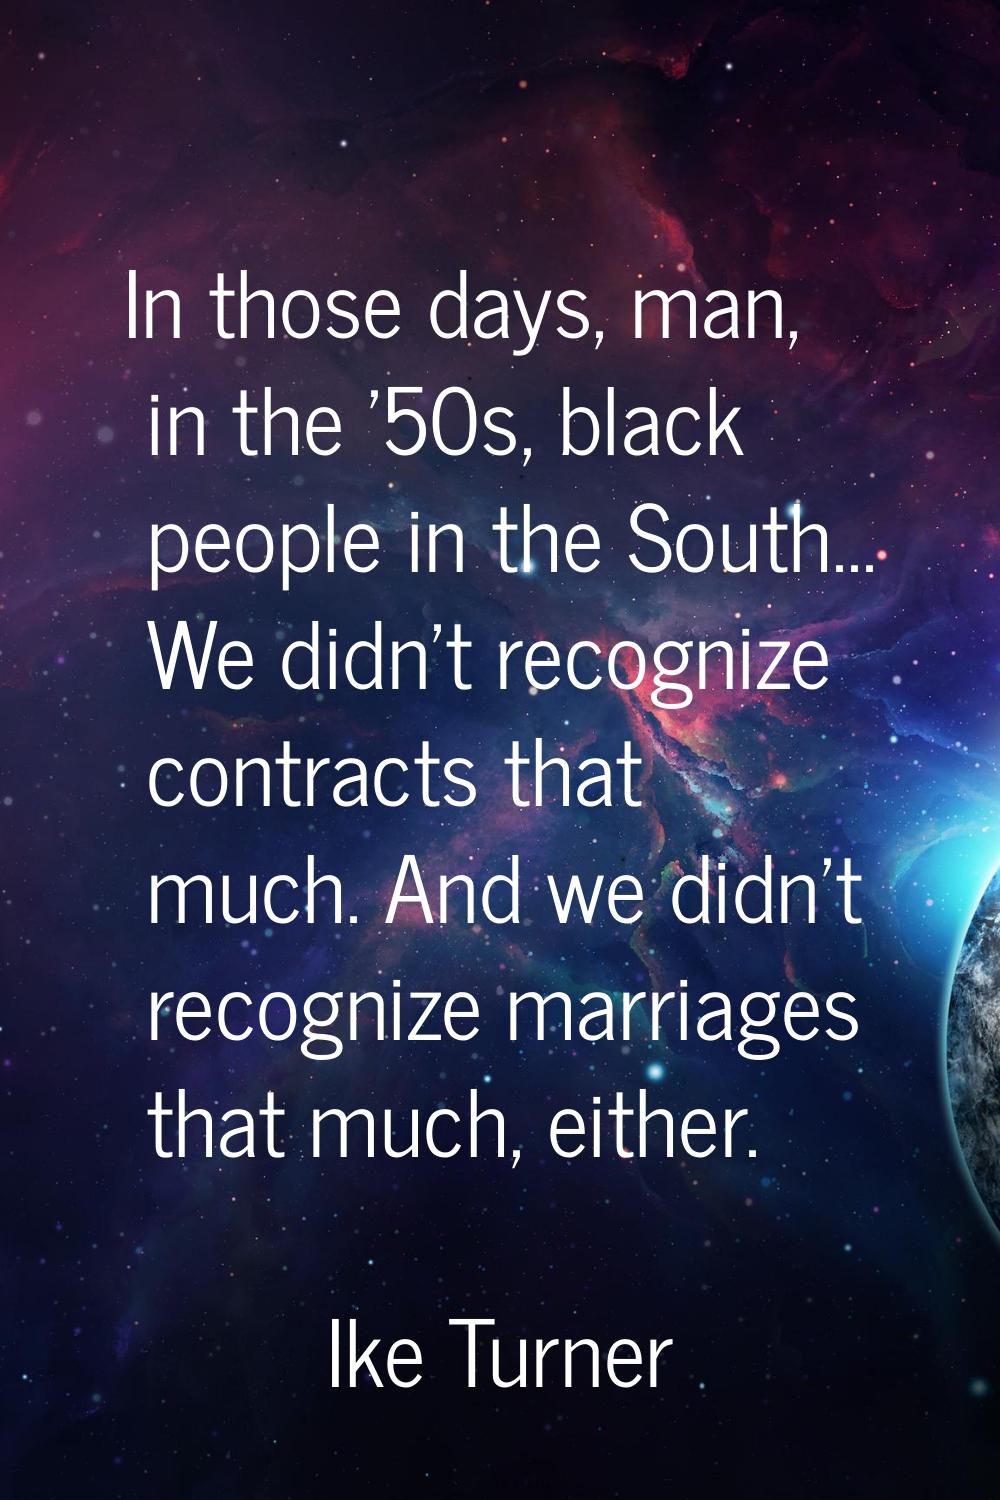 In those days, man, in the '50s, black people in the South... We didn't recognize contracts that mu